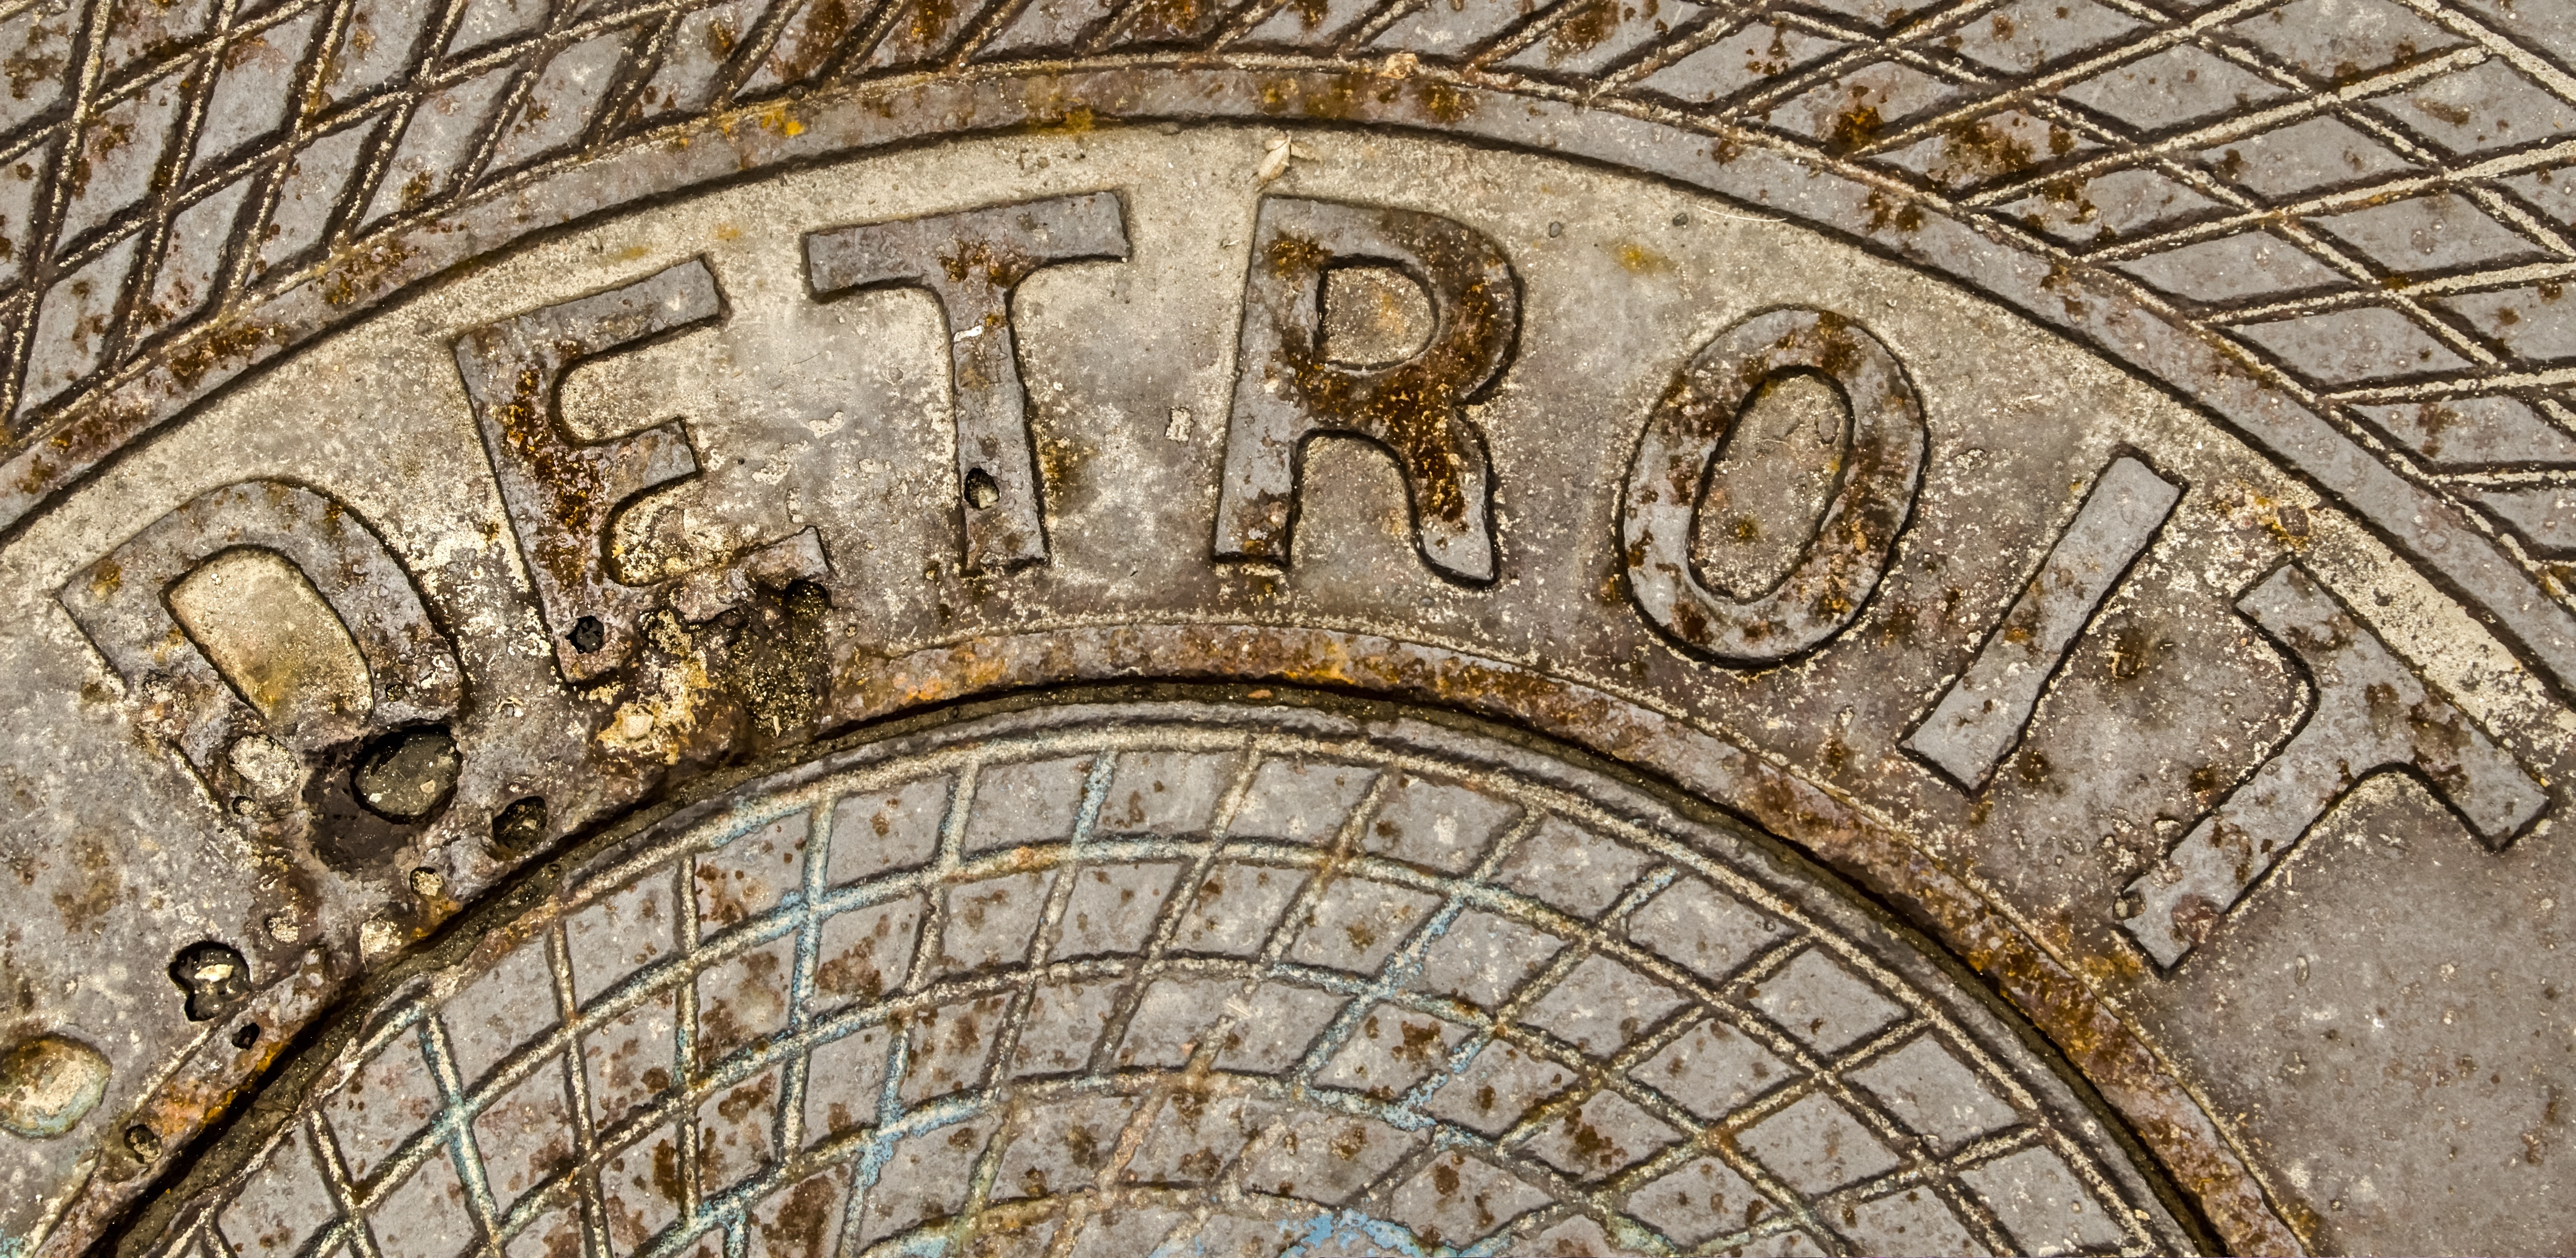 Detroit Michigan Background. Rusty manhole cover with the word Detroit engraved on it.